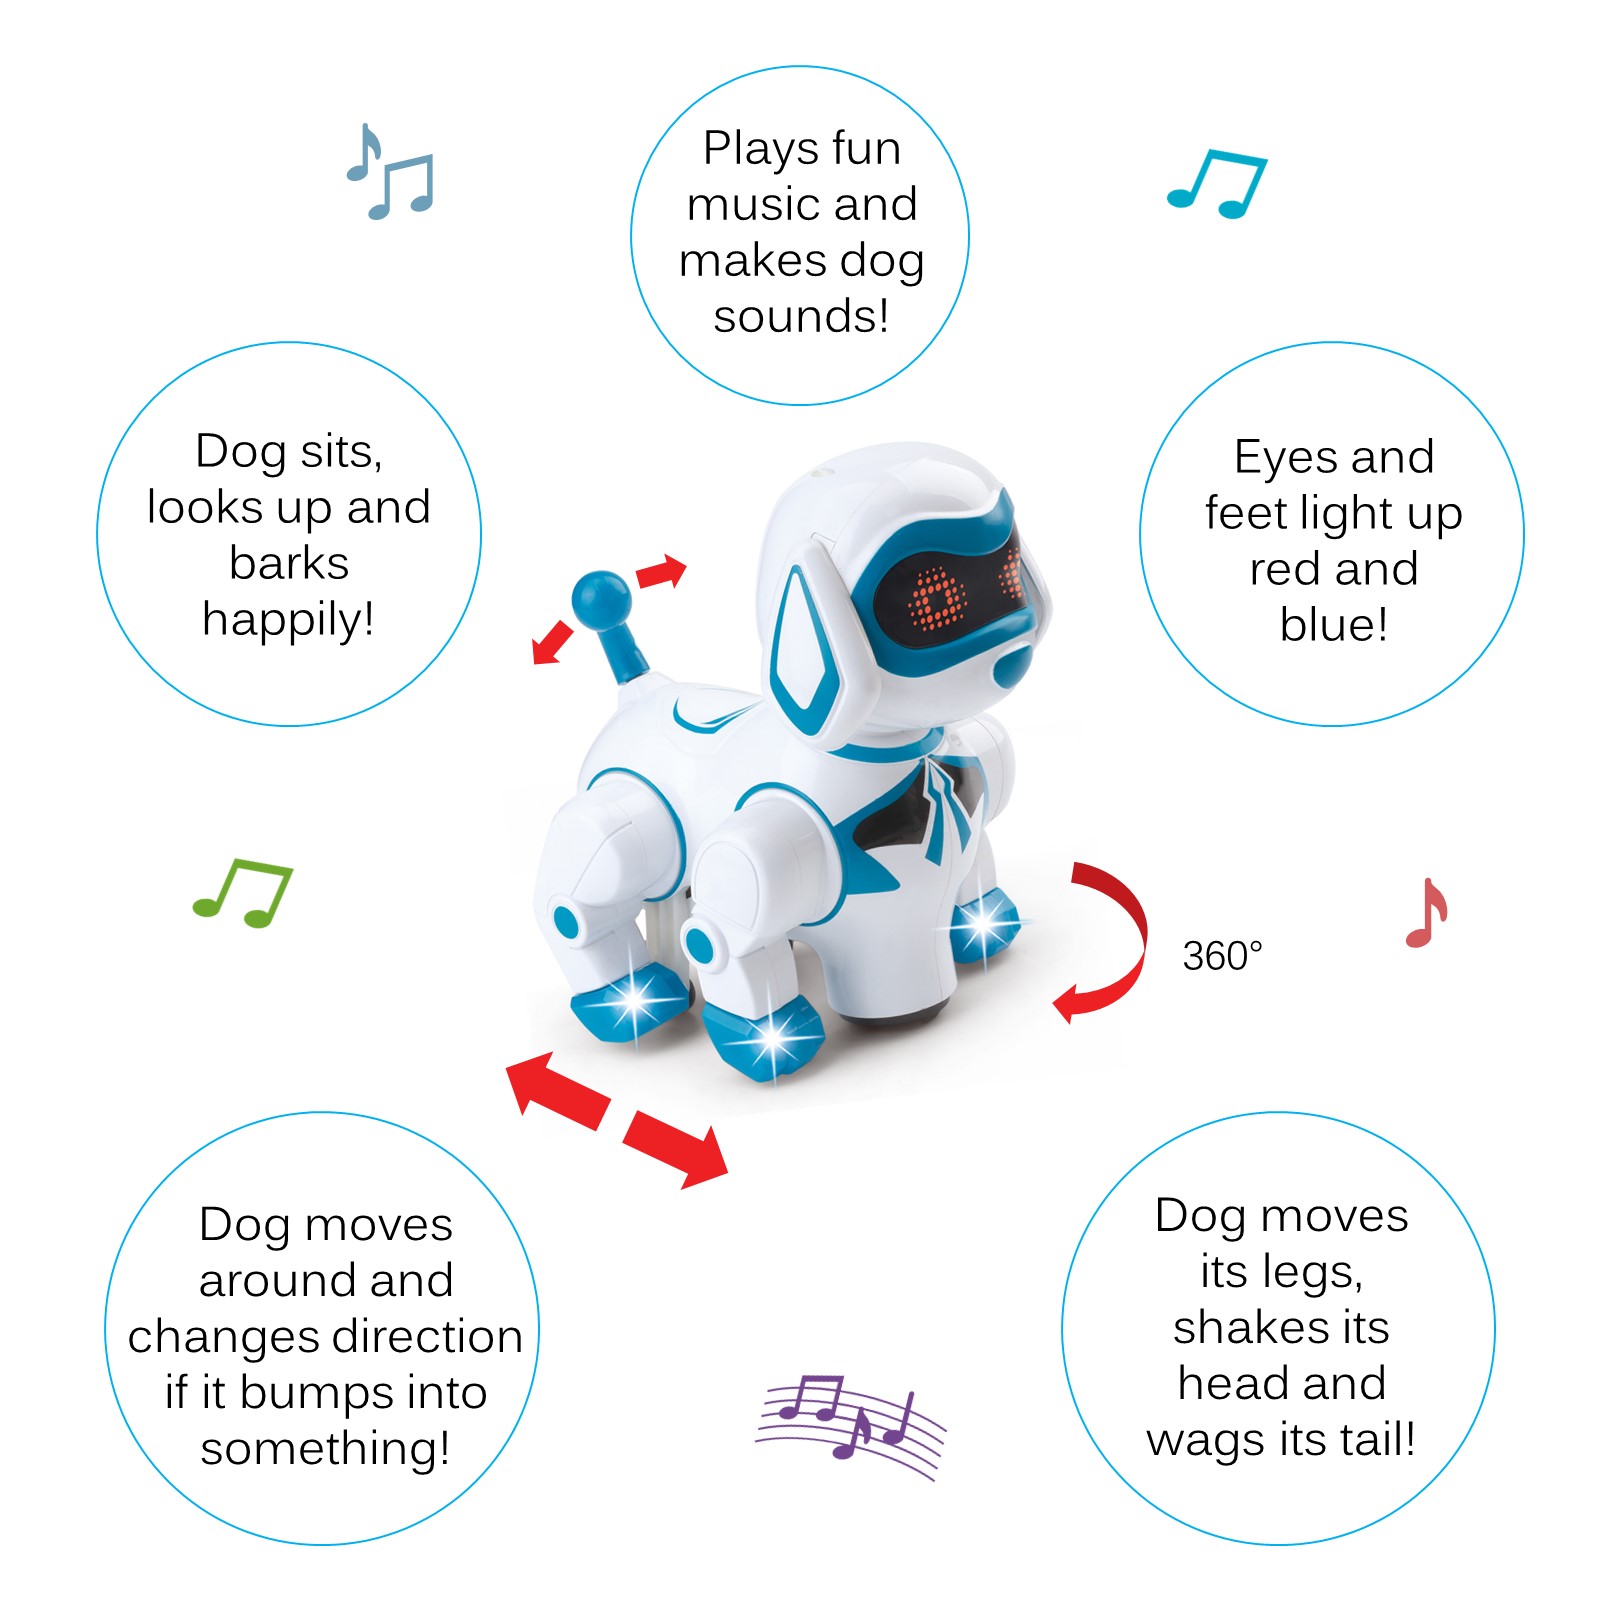 Vokodo Pet Robotic Dog Interactive Kids Toy Puppy Walks Barks Sits With Lights And Music Friendly Electronic Robot Companion Bump And Go Action Play Great Gift For Preschool Children Boy Girl Toddlers TD-30